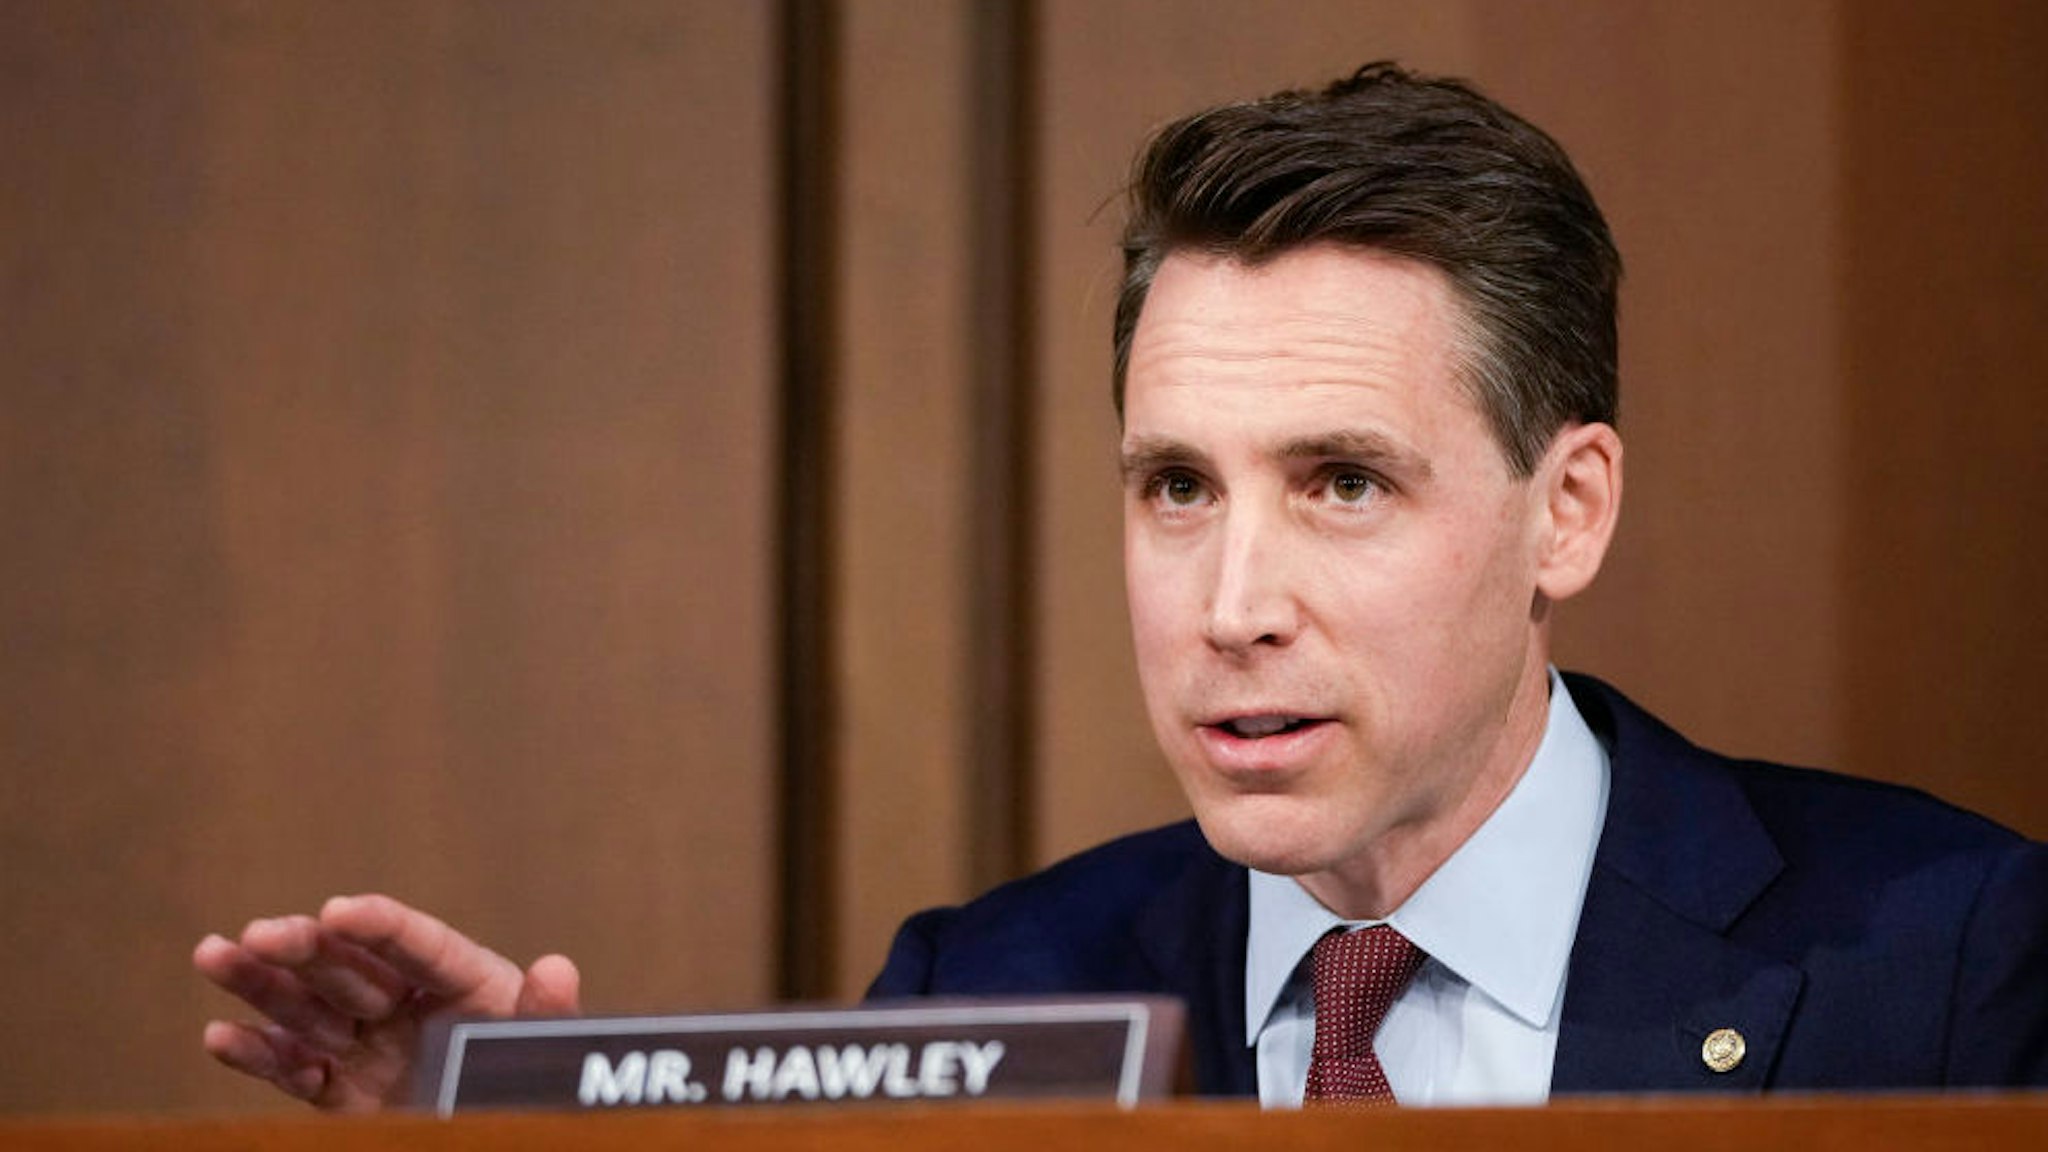 Sen. Josh Hawley (R-MO) delivers remarks during the Senate Judiciary Committee confirmation hearing for U.S. Supreme Court nominee Judge Ketanji Brown Jackson in the Hart Senate Office Building on Capitol Hill March 21, 2022 in Washington, DC.